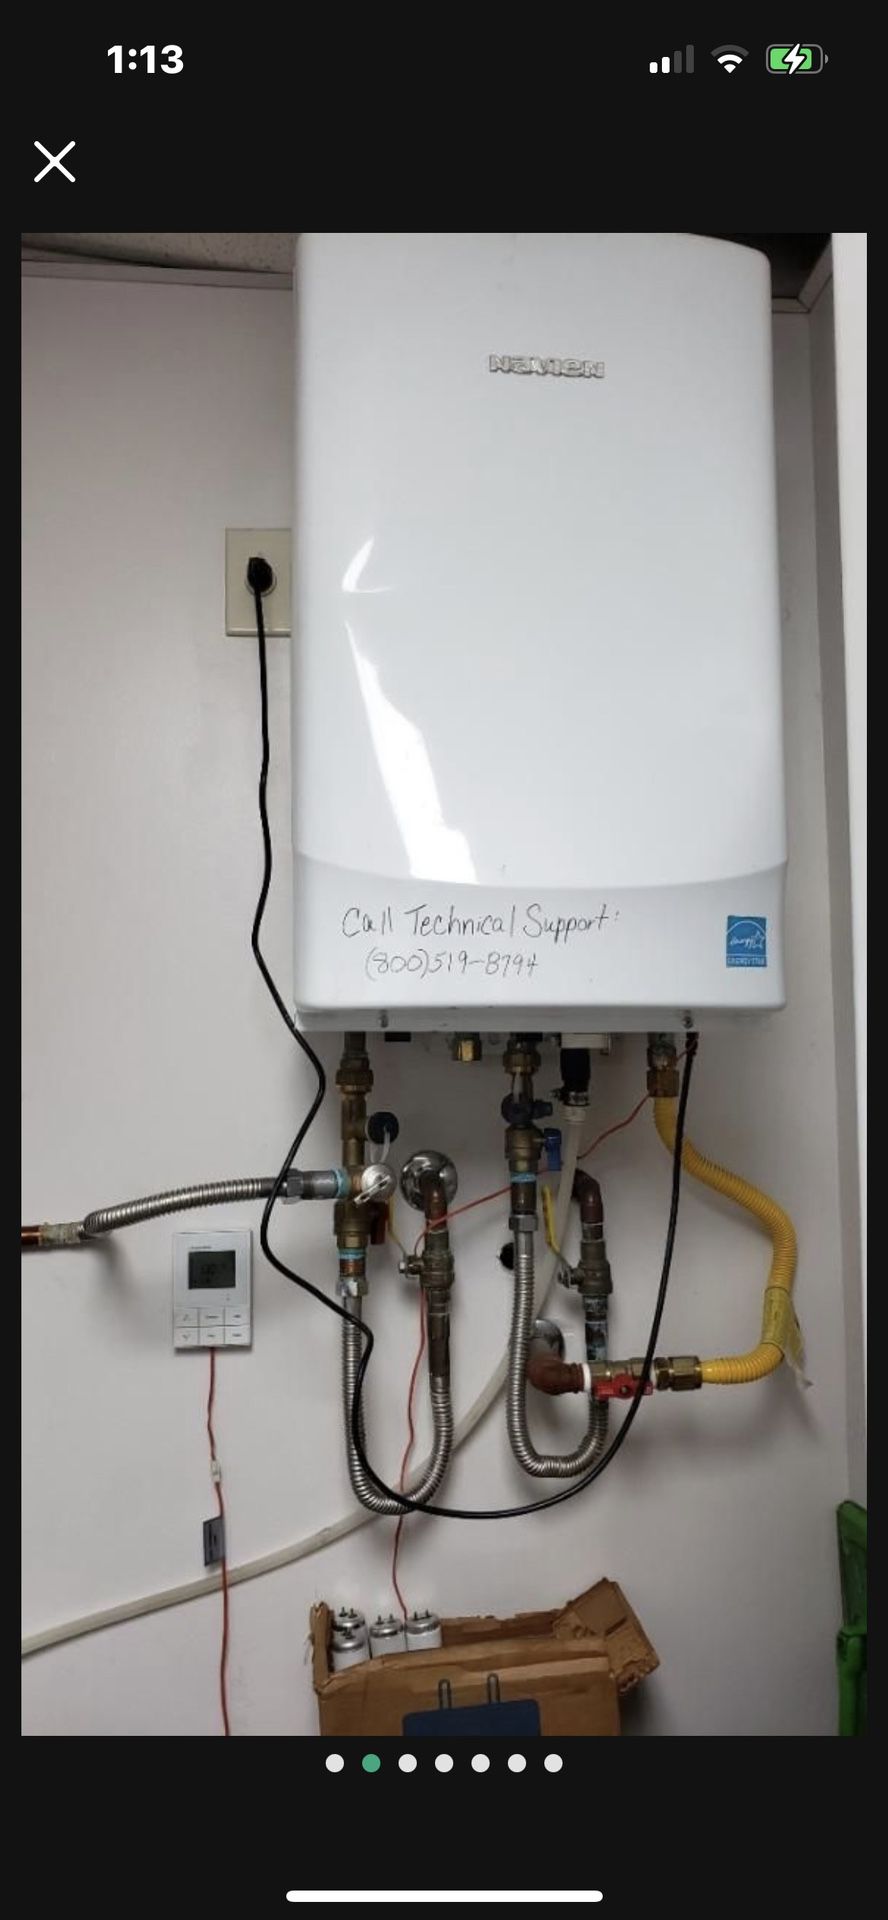 HOT WATER HEATER, NAVIEN  It is 15 years old but now that we have replaced it we found out the problem was the outlet instead of the heater.  I am goi